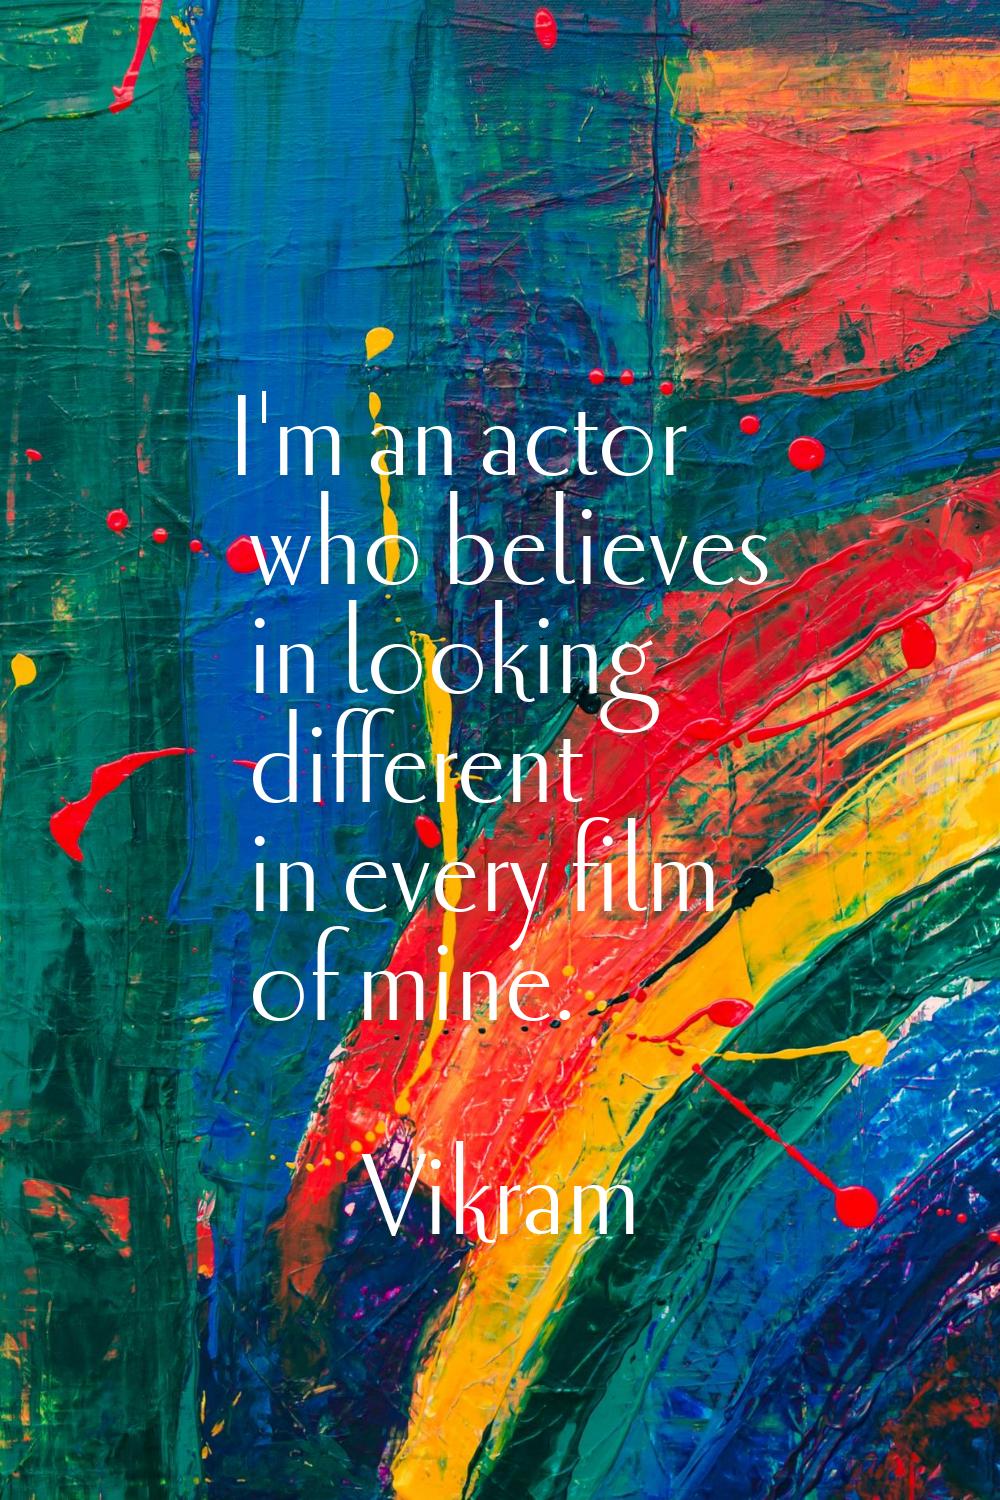 I'm an actor who believes in looking different in every film of mine.